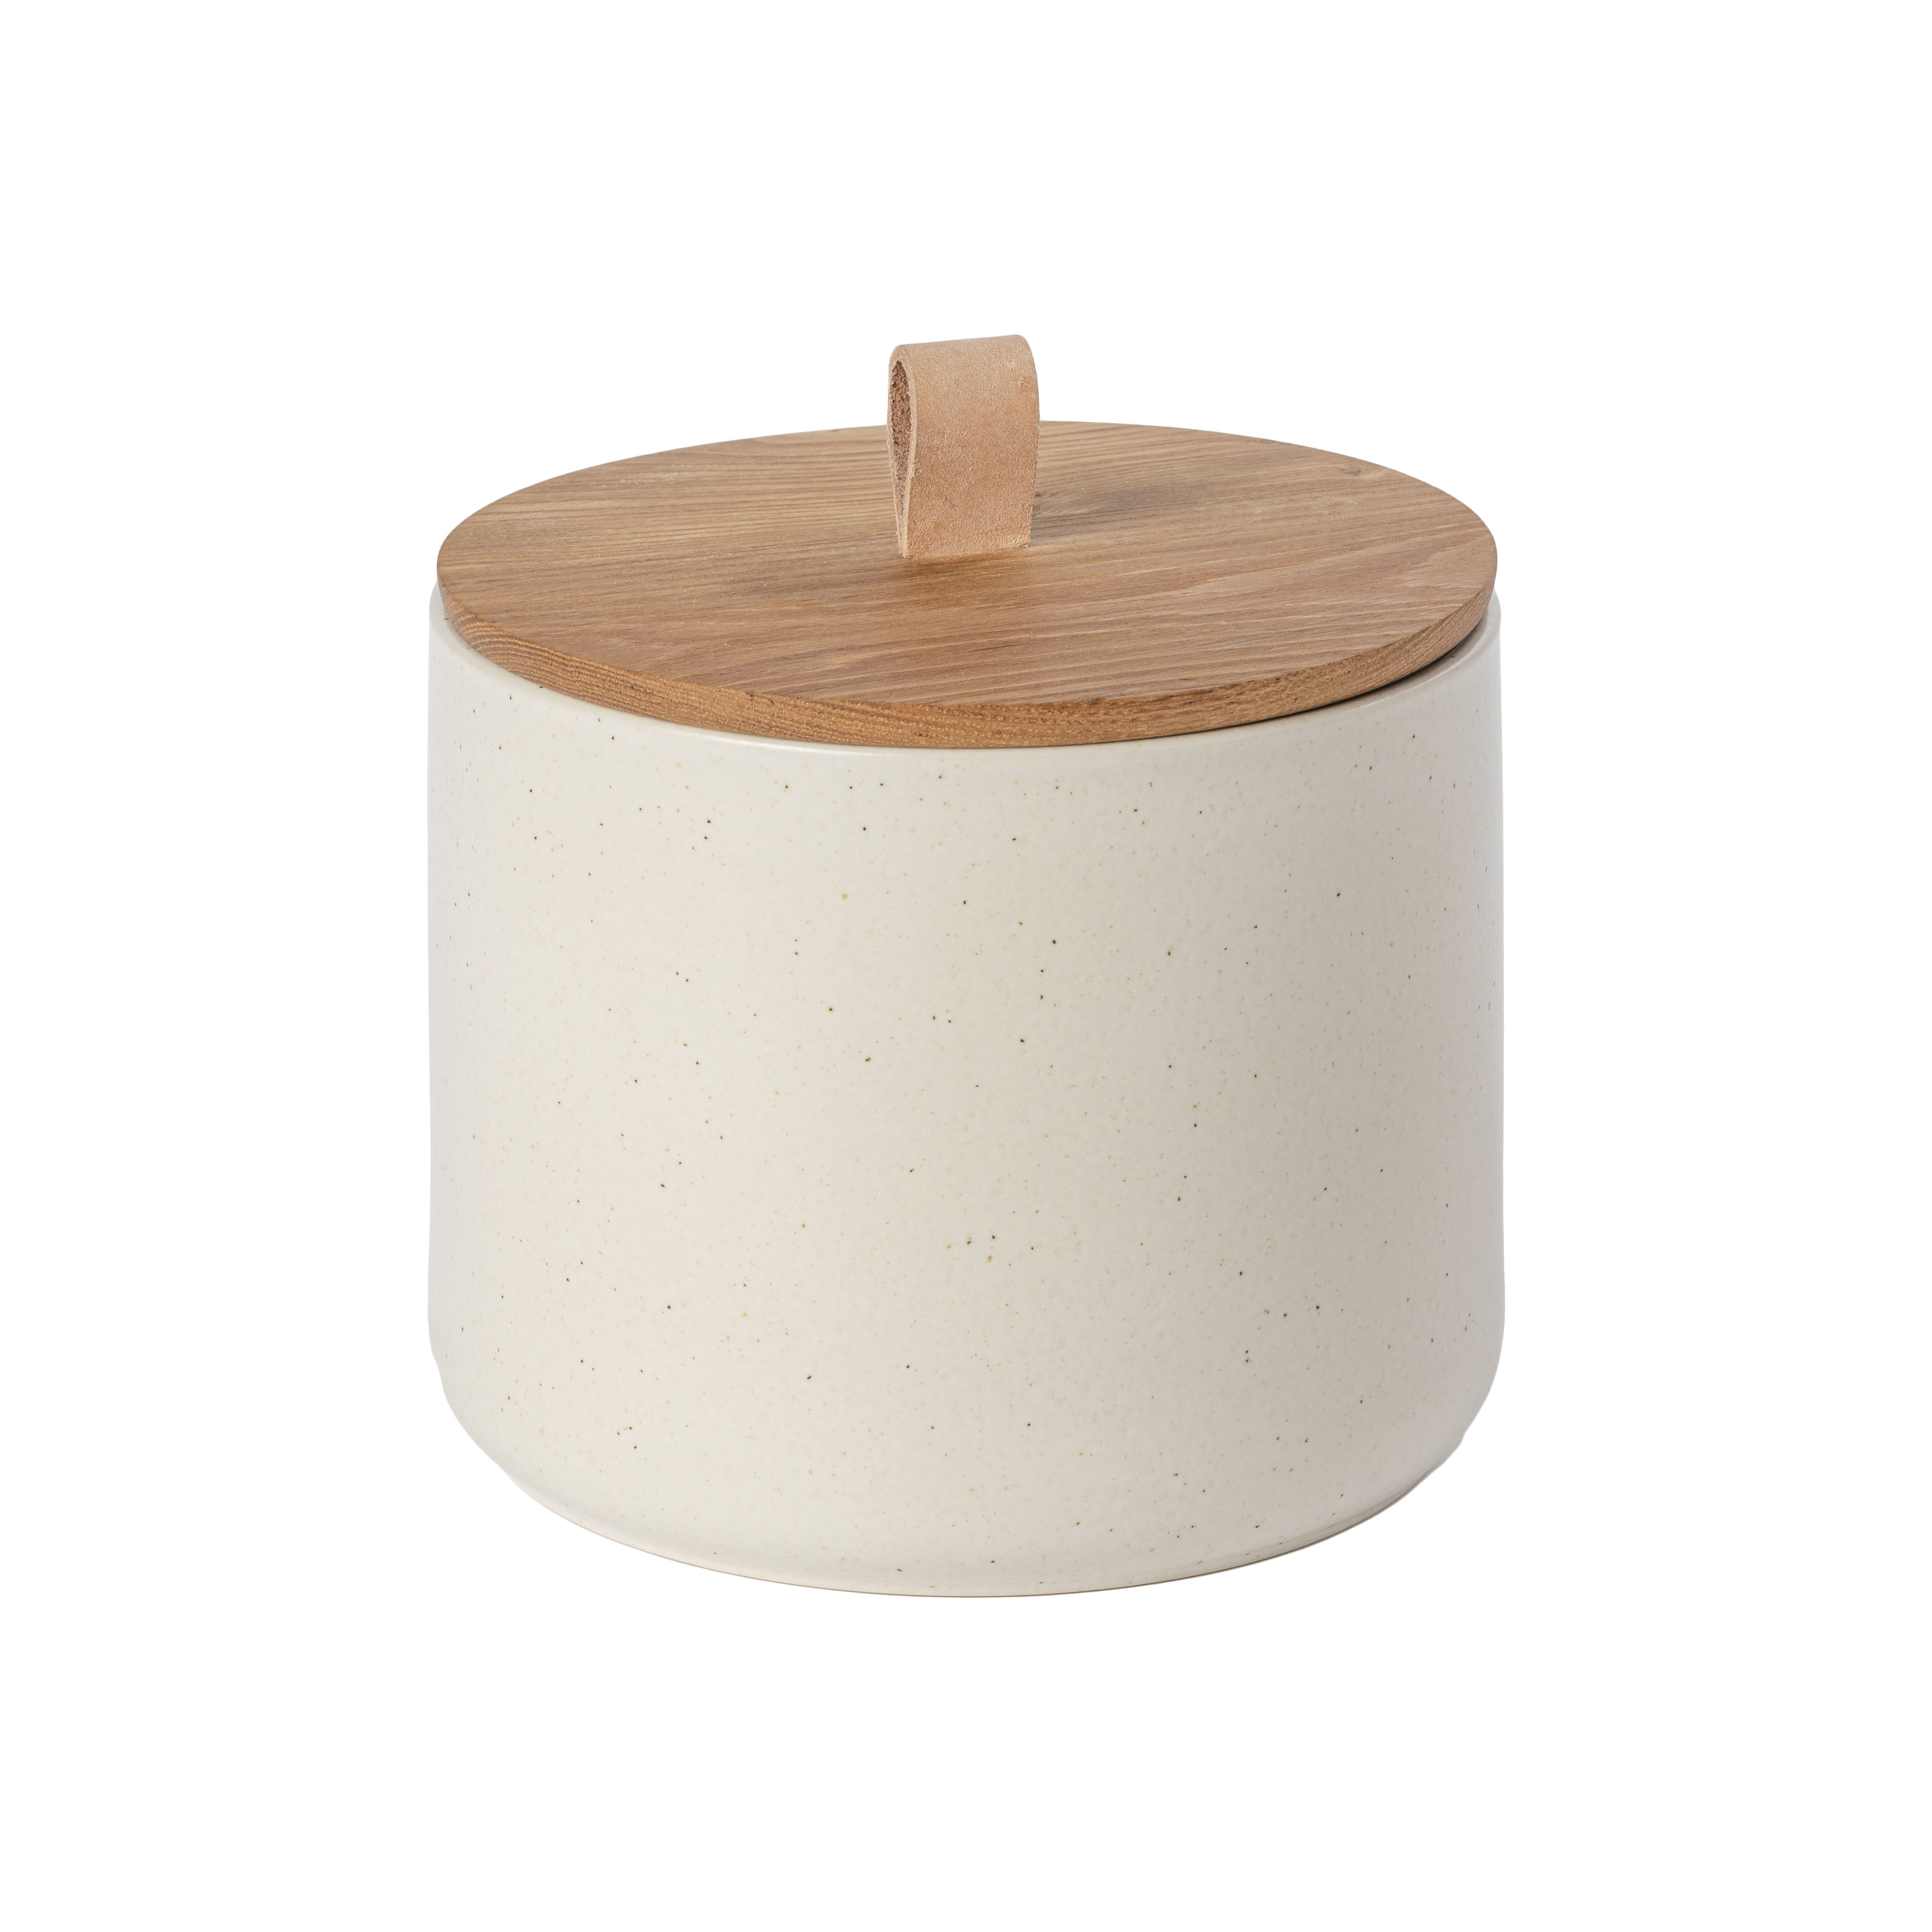 Pacifica Vanilla Canister 19.8cm Oak Wood Lid Gift